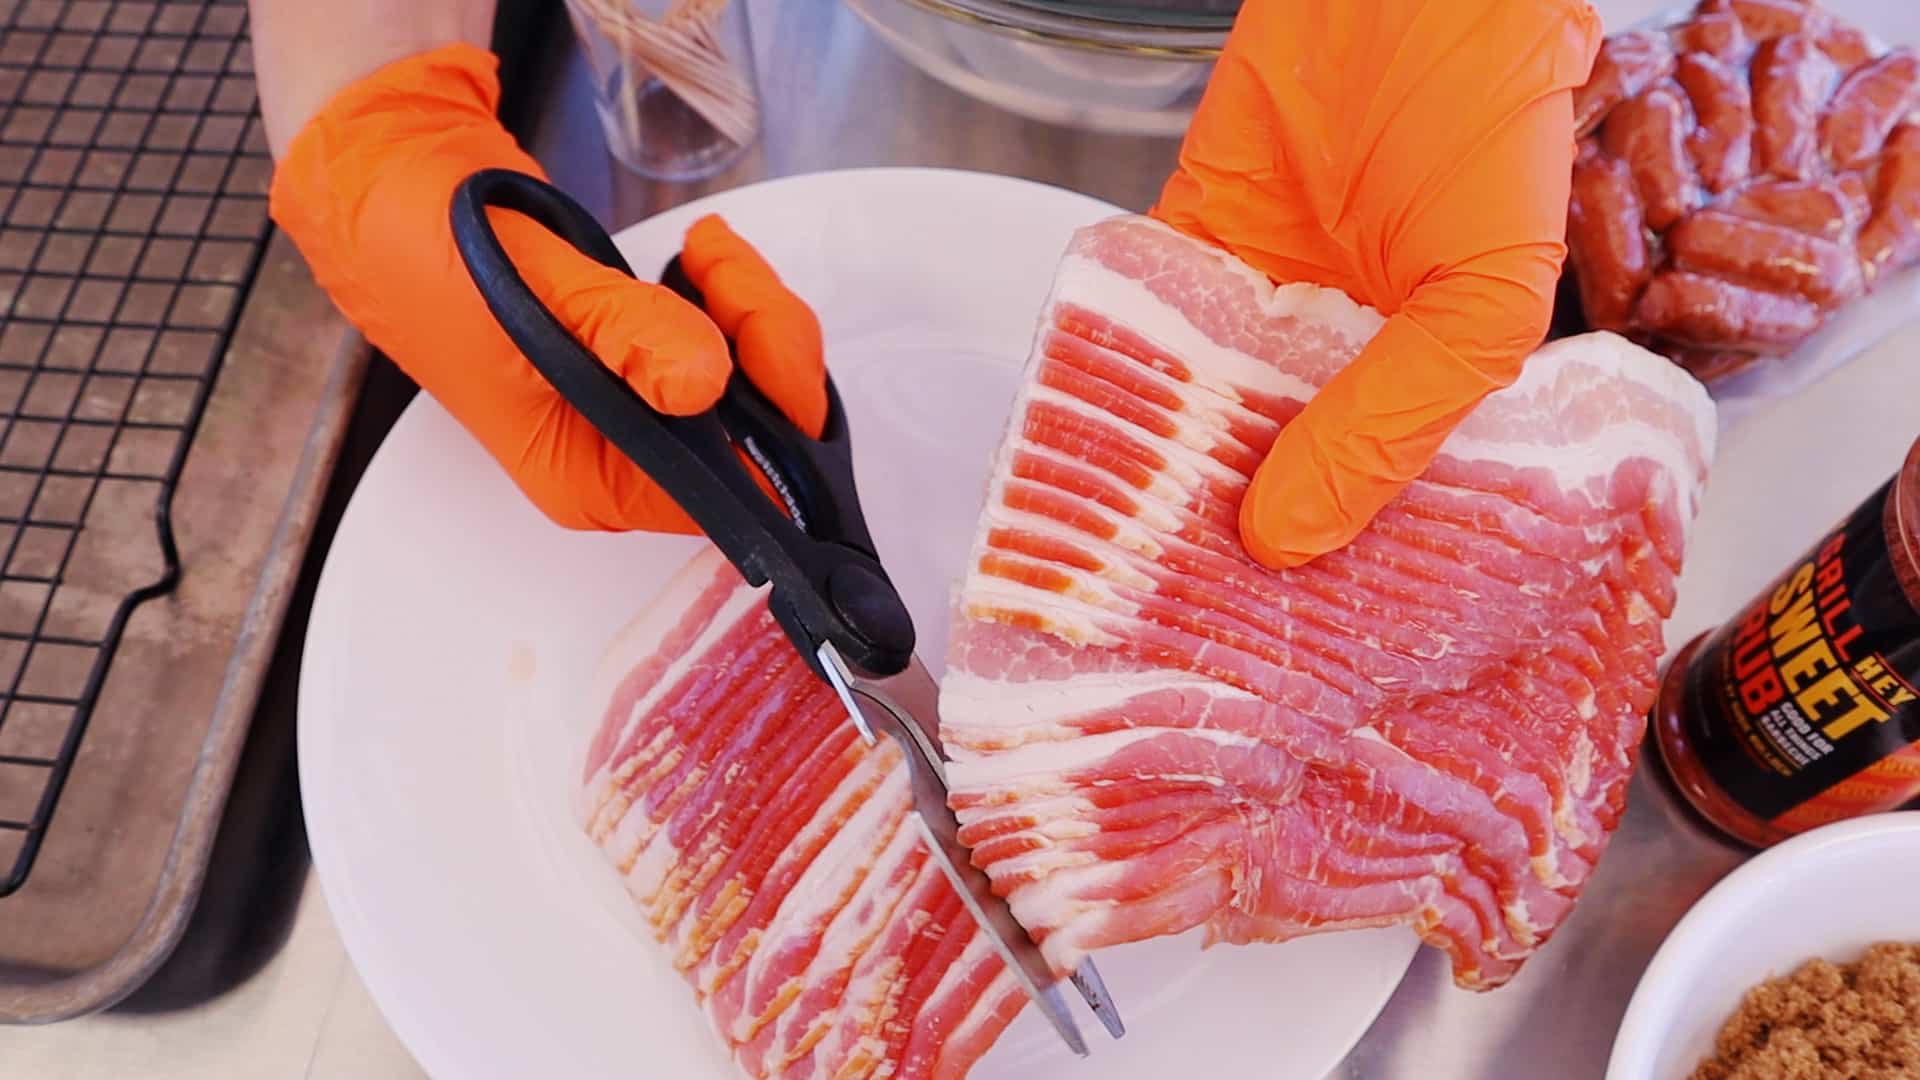 Bacon being cut into thirds with kitchen shears.